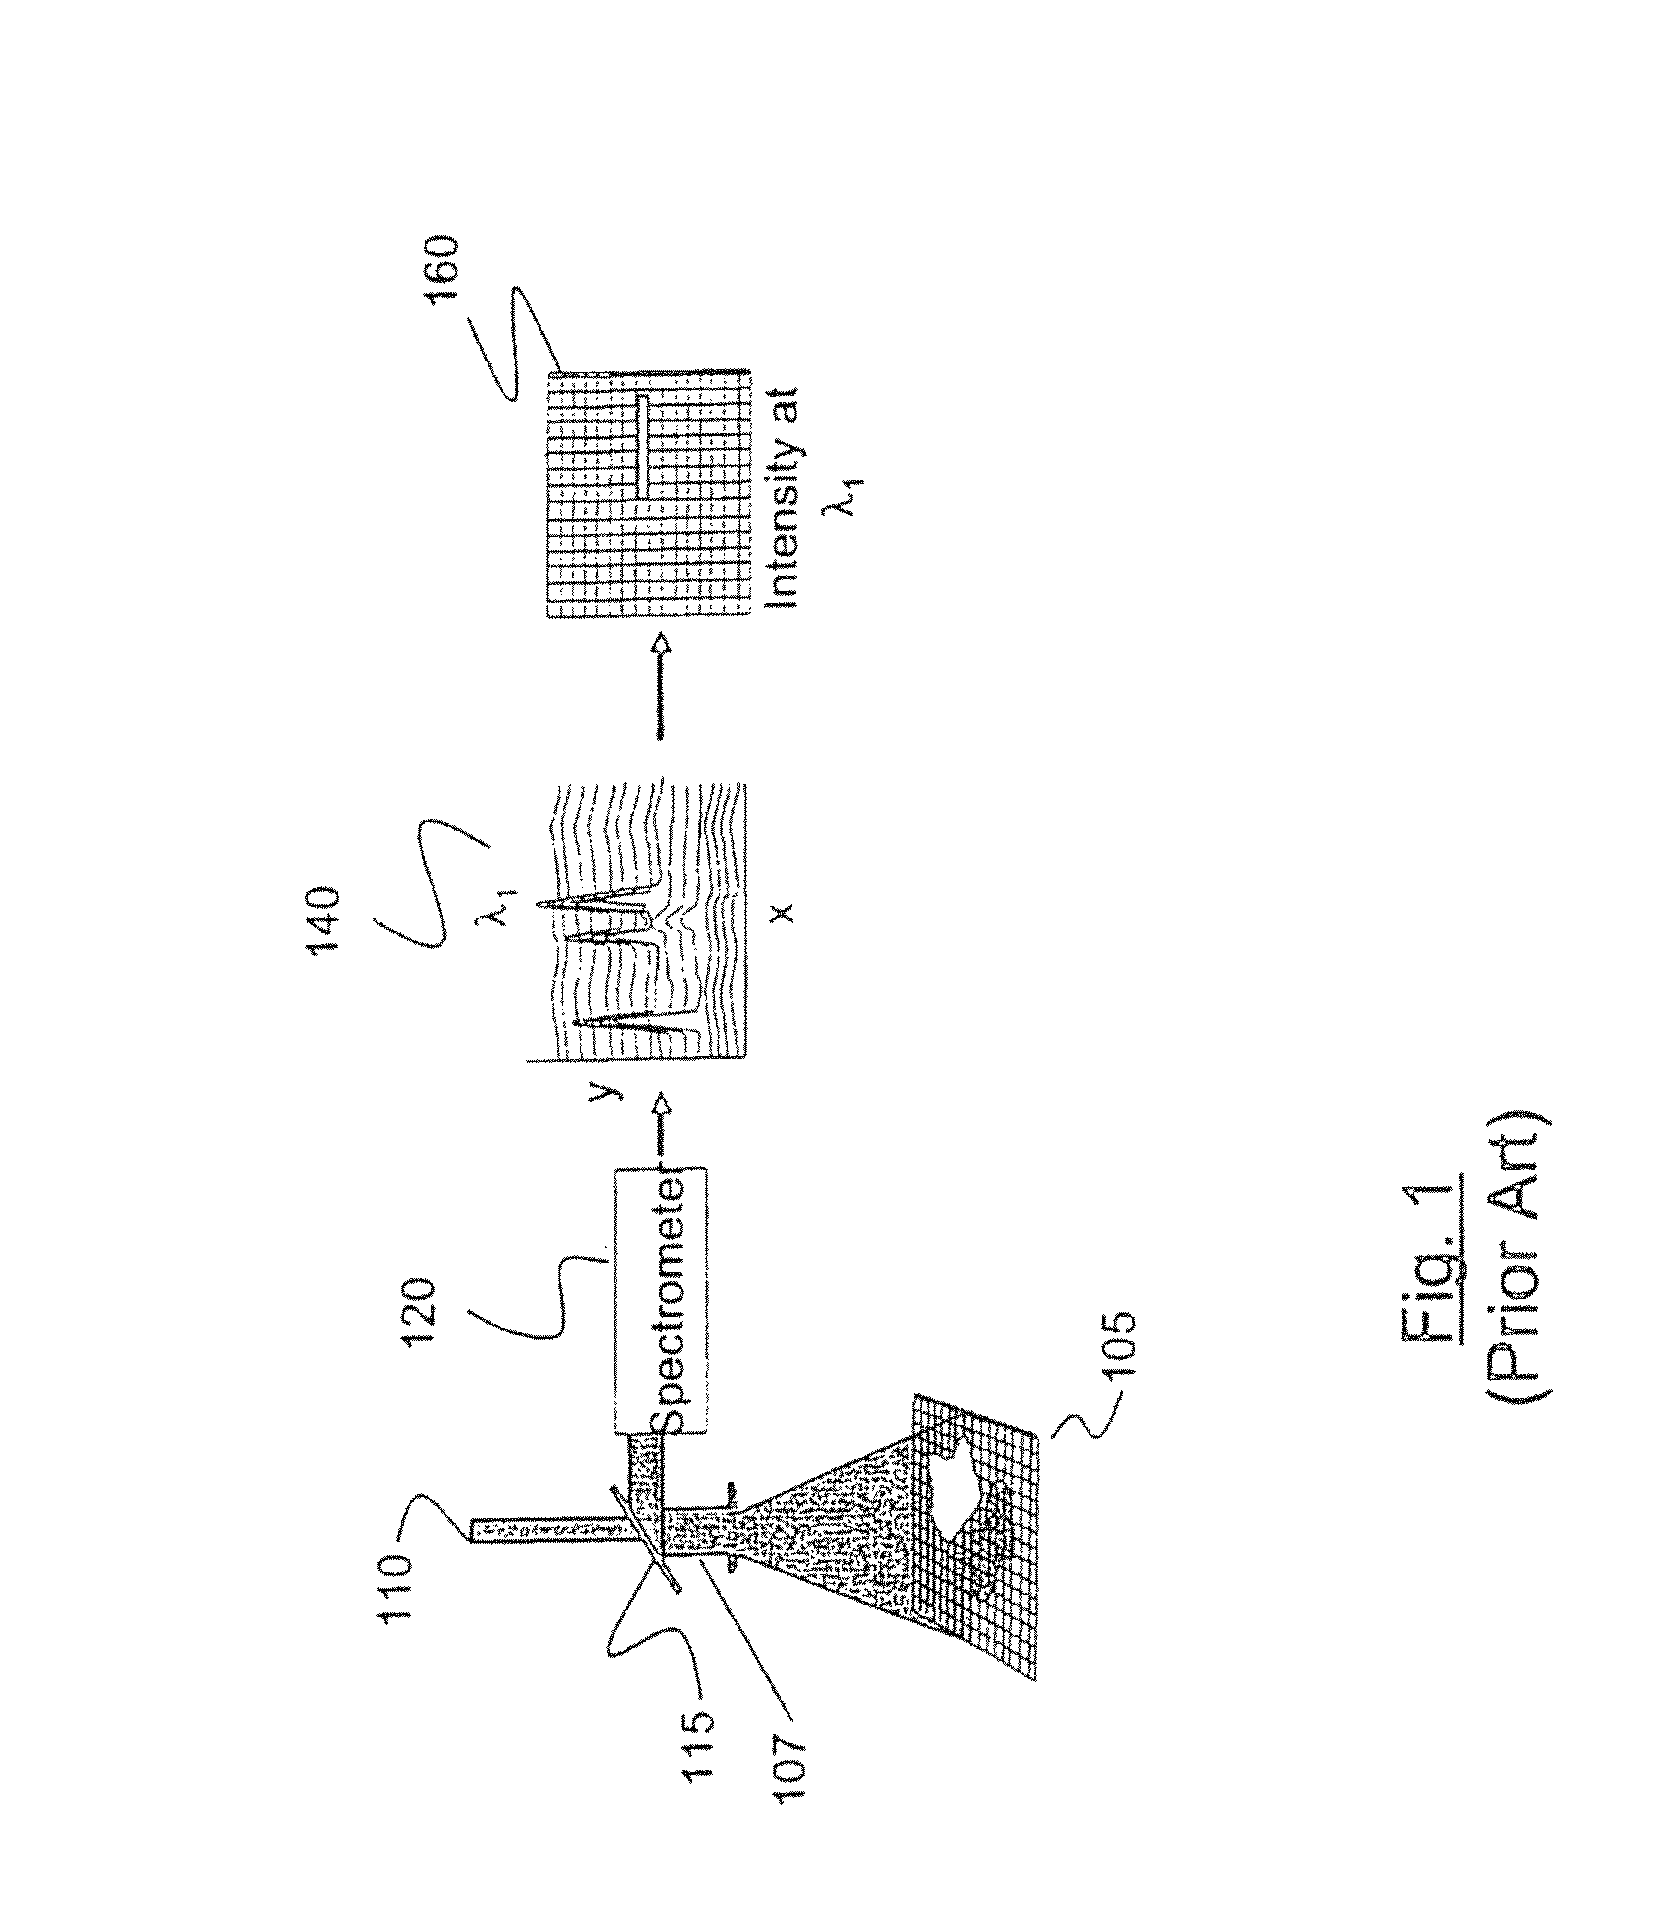 Method and apparatus for compact spectrometer for multipoint sampling of an object